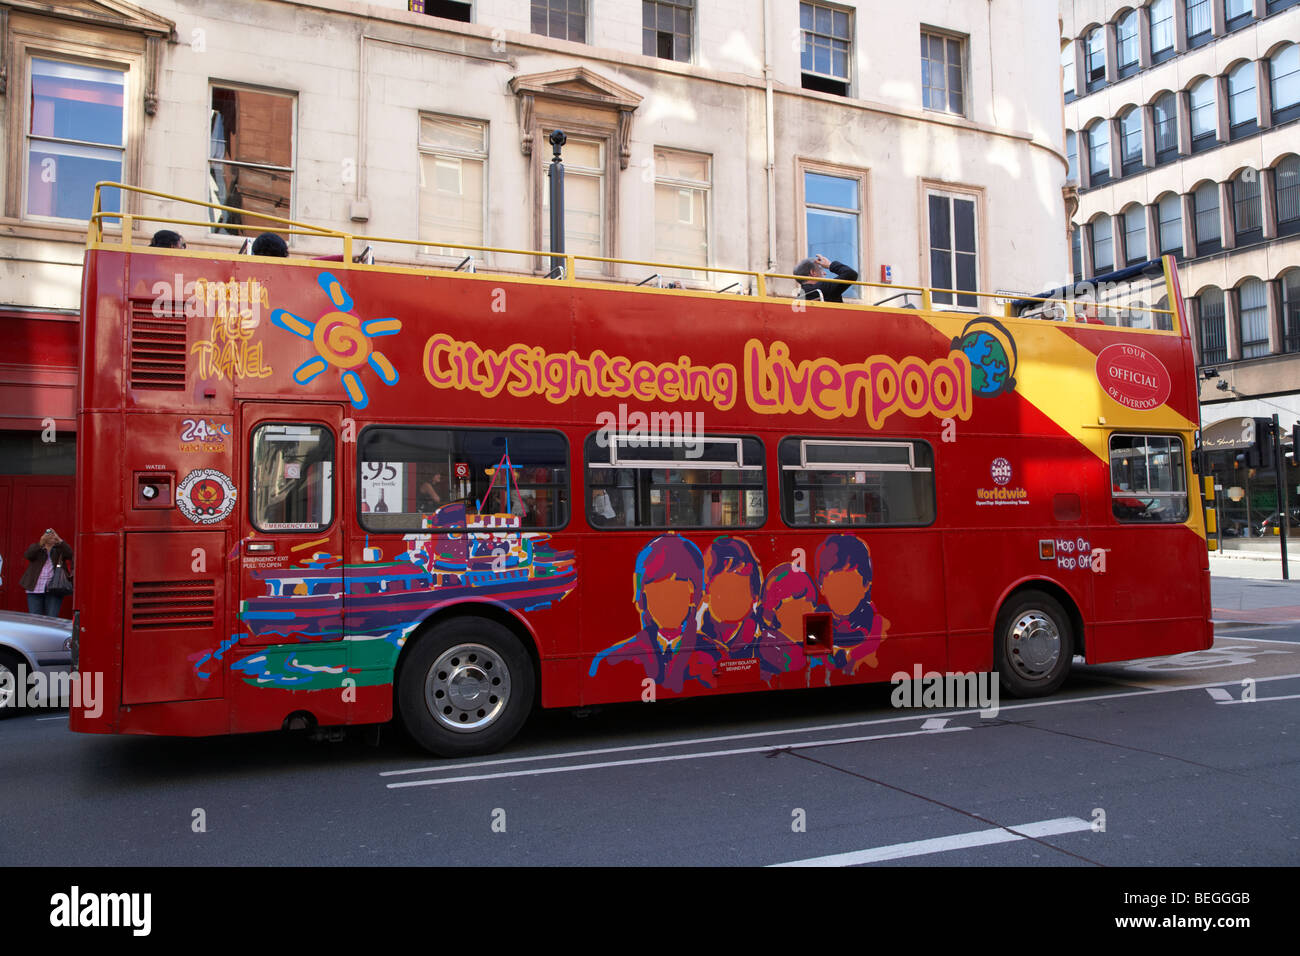 red city sightseeing red open topped bus in liverpool merseyside england uk Stock Photo